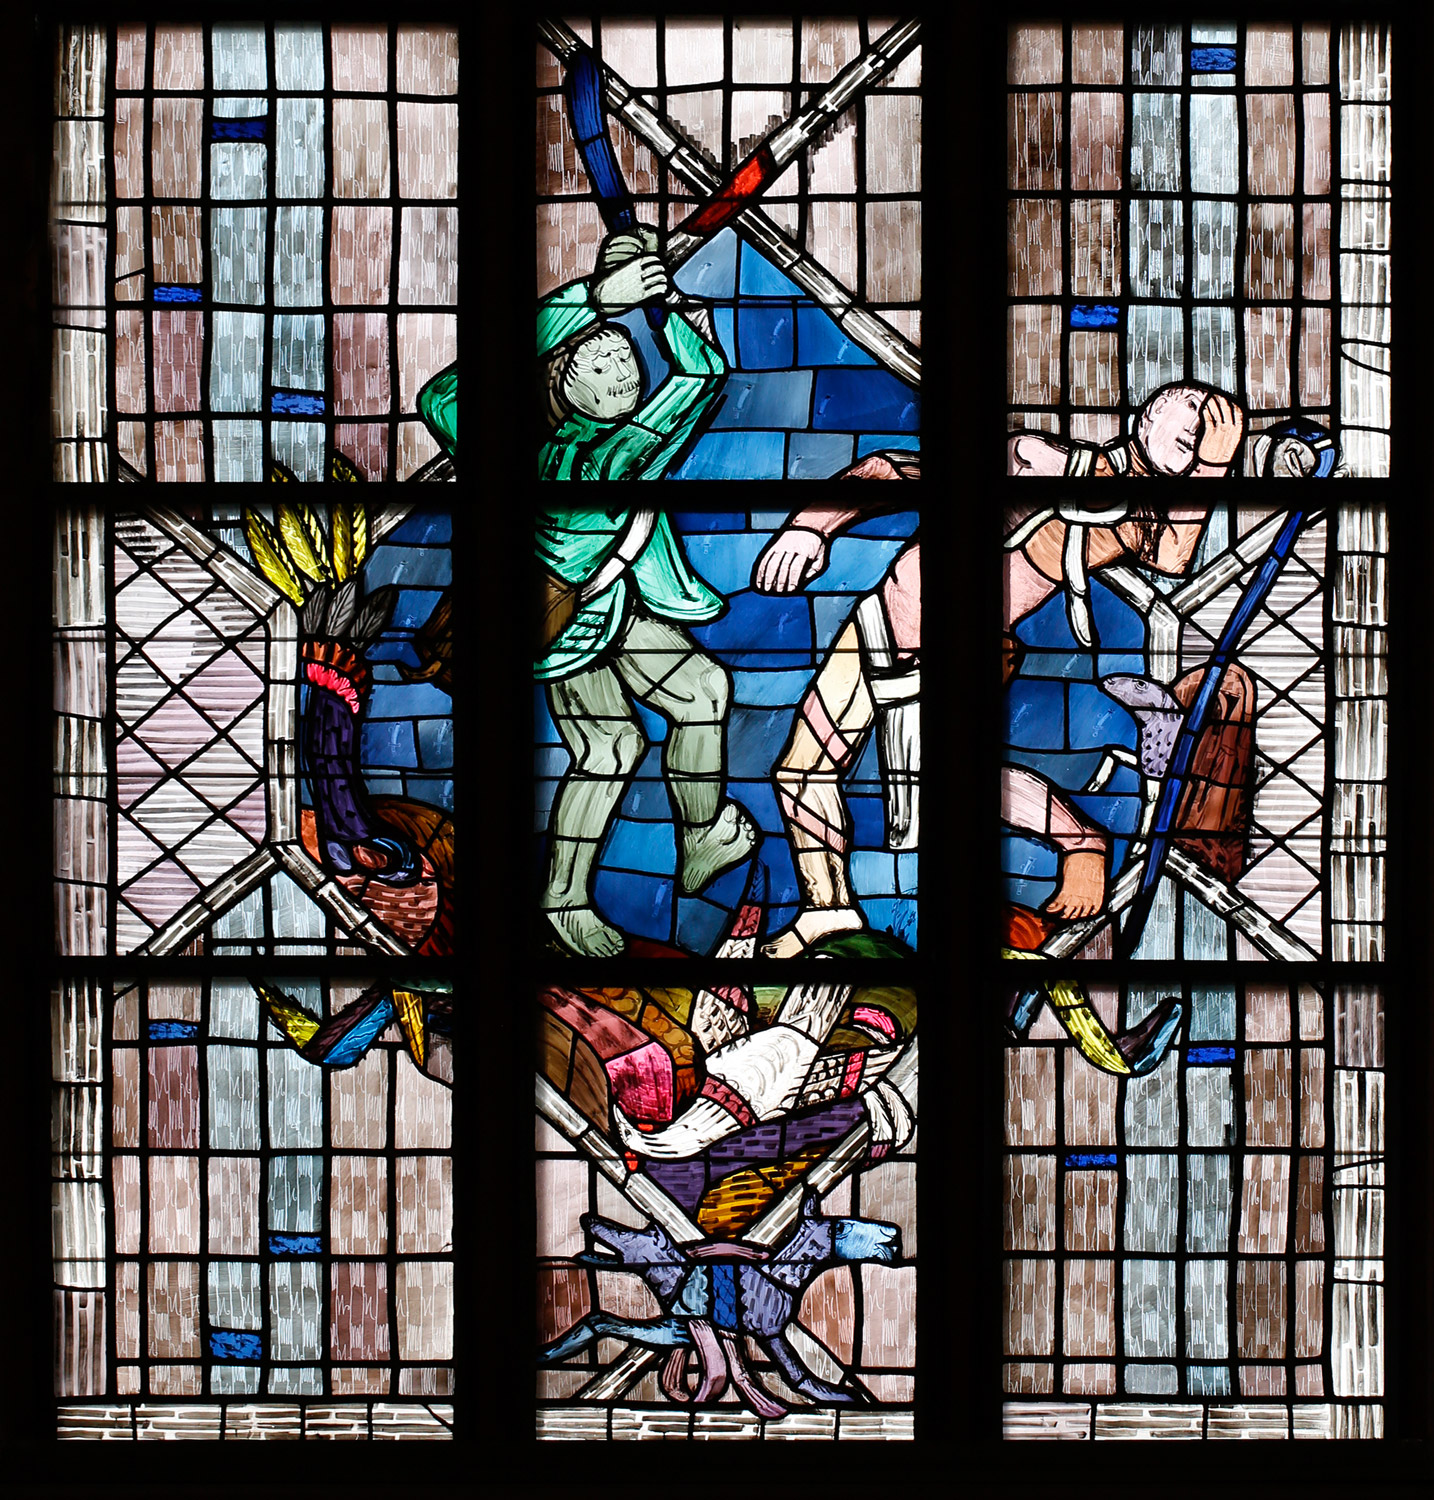 The “Cain and Abel” window, detail